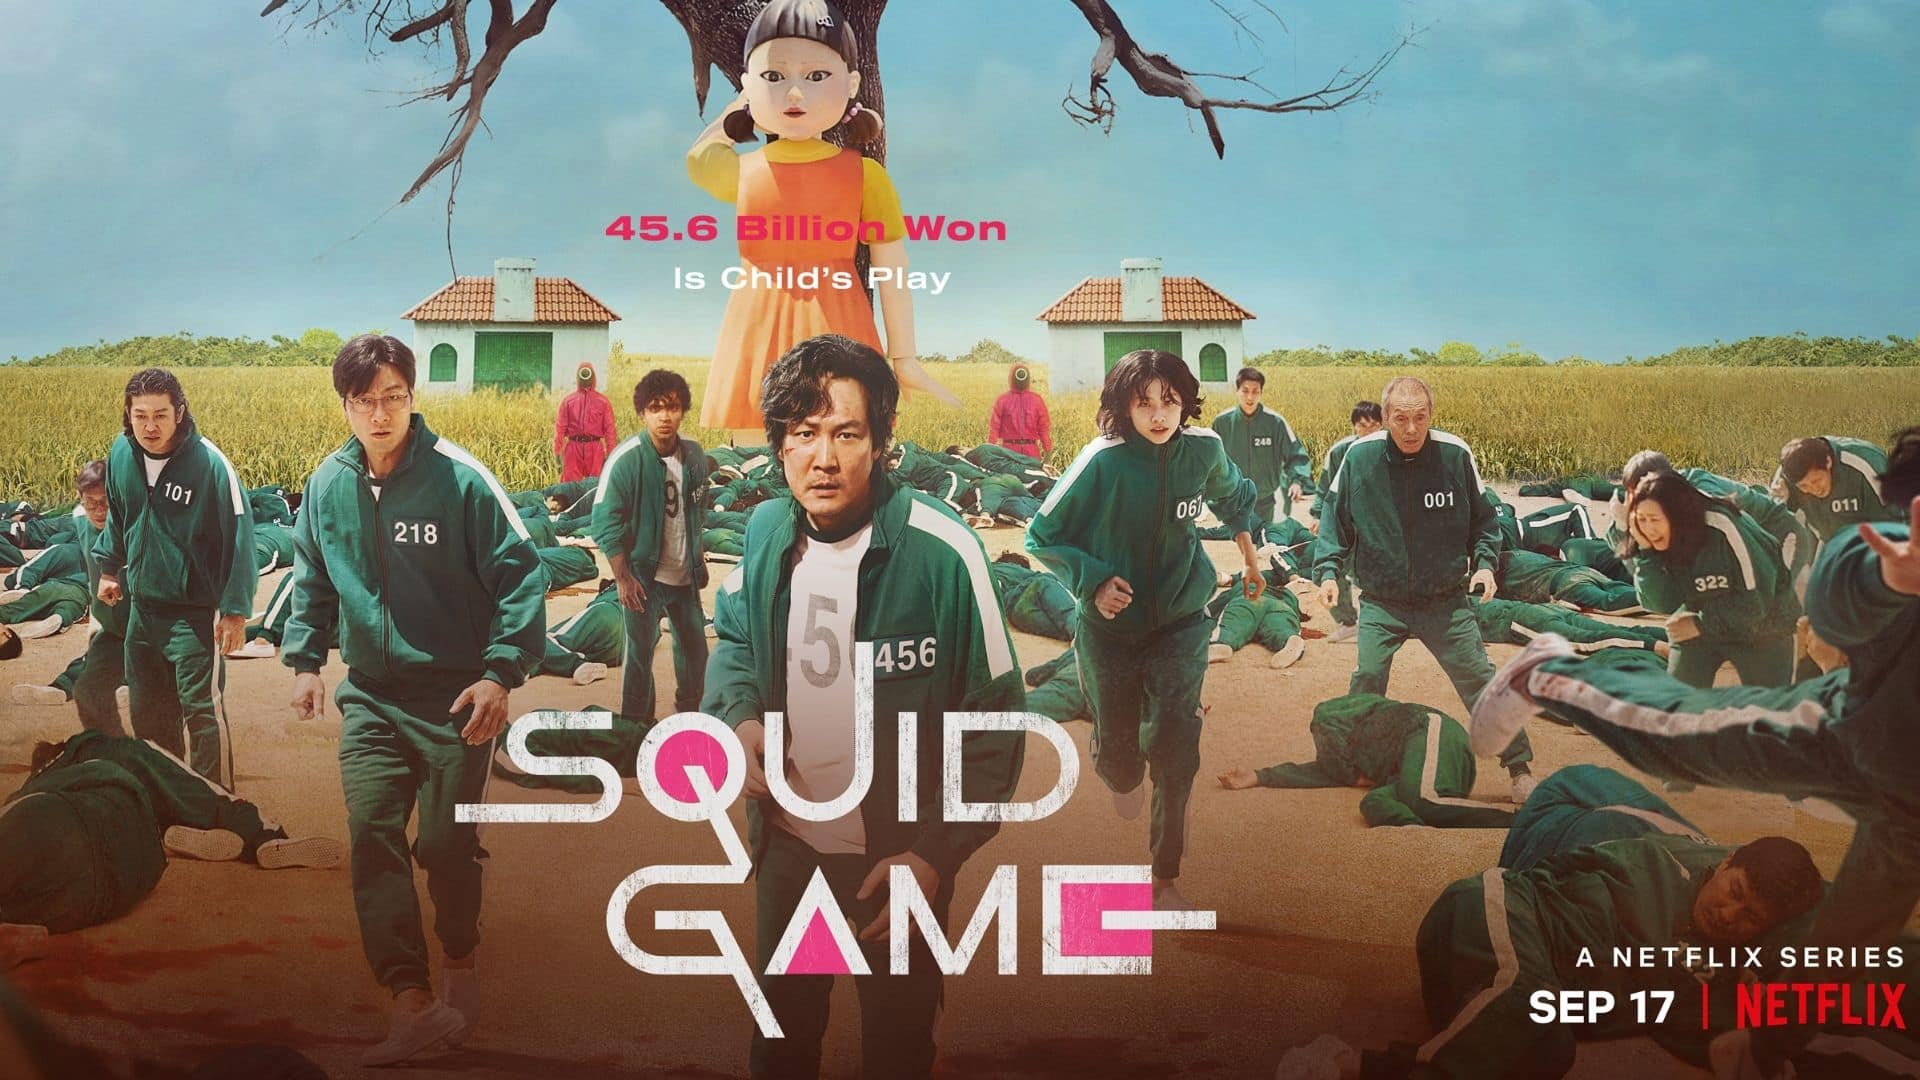 Squid Game poster for Netlifx TV series